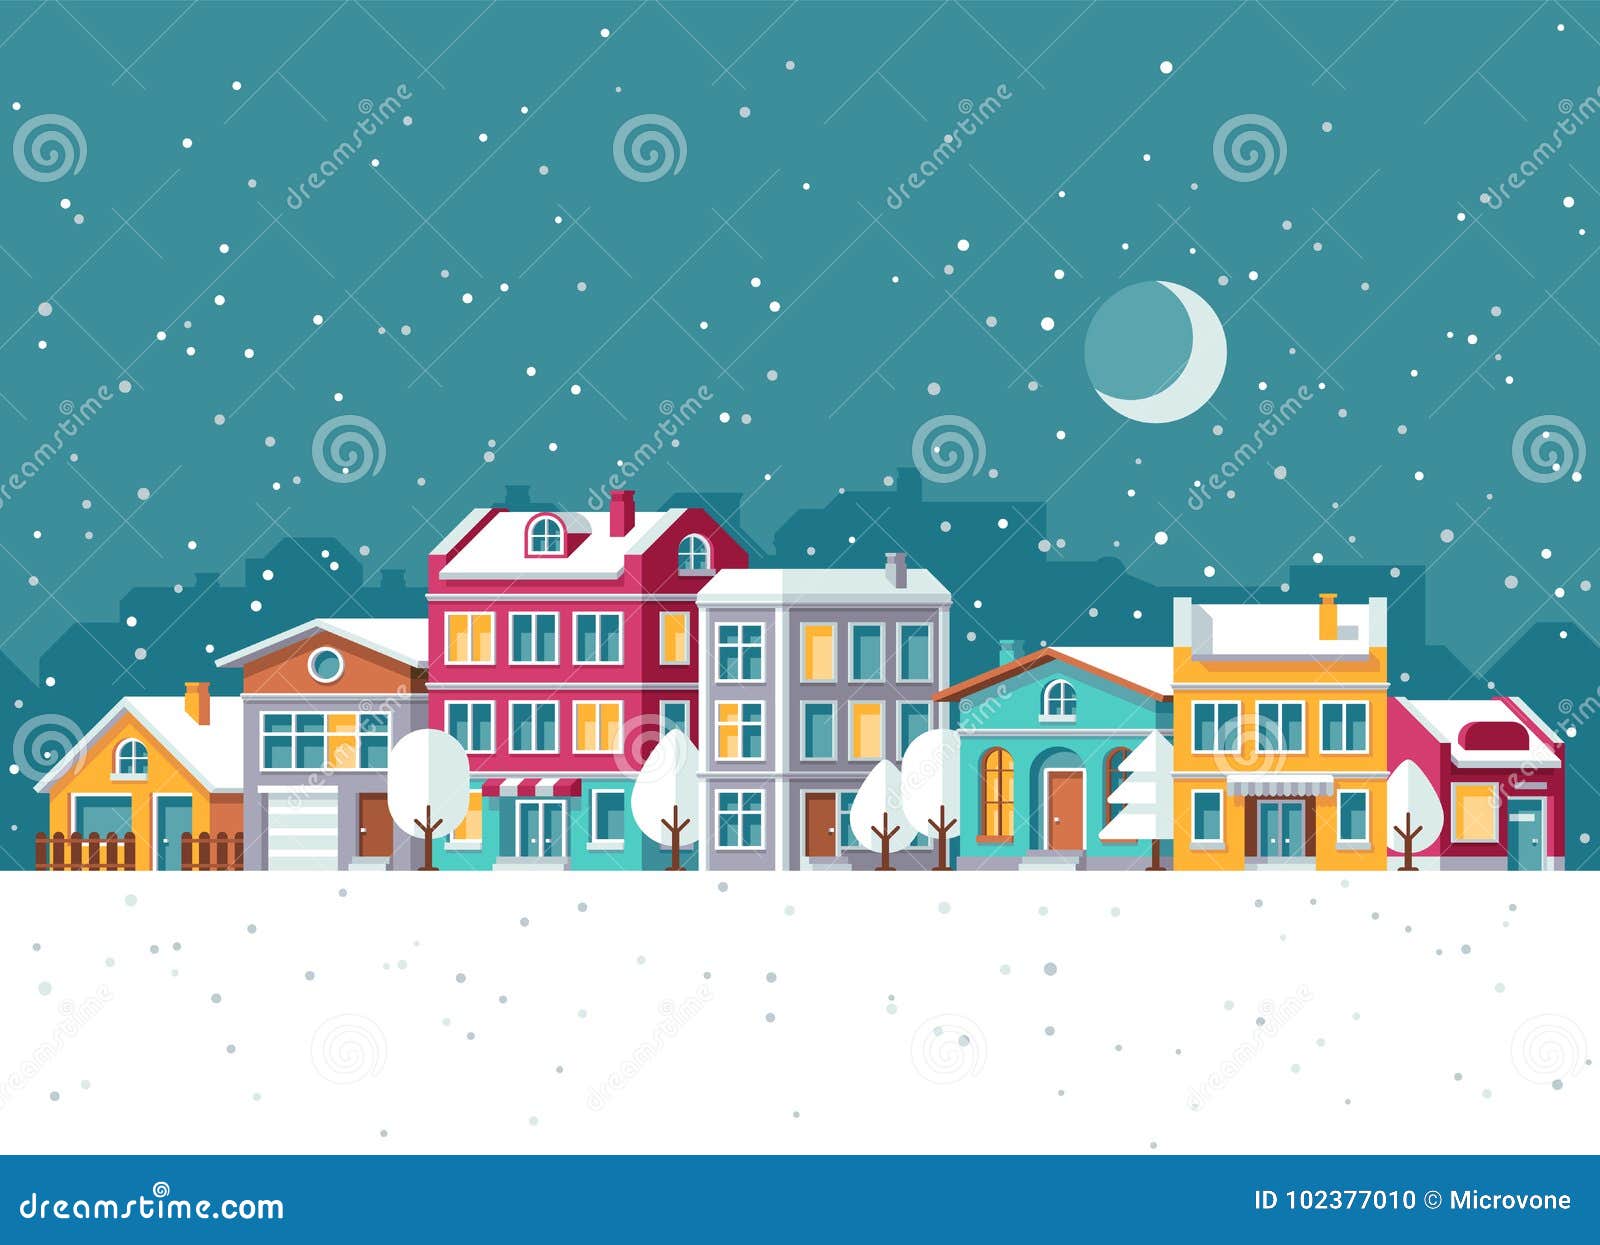 snowfall in winter town with small houses cartoon  . christmas holidays concept